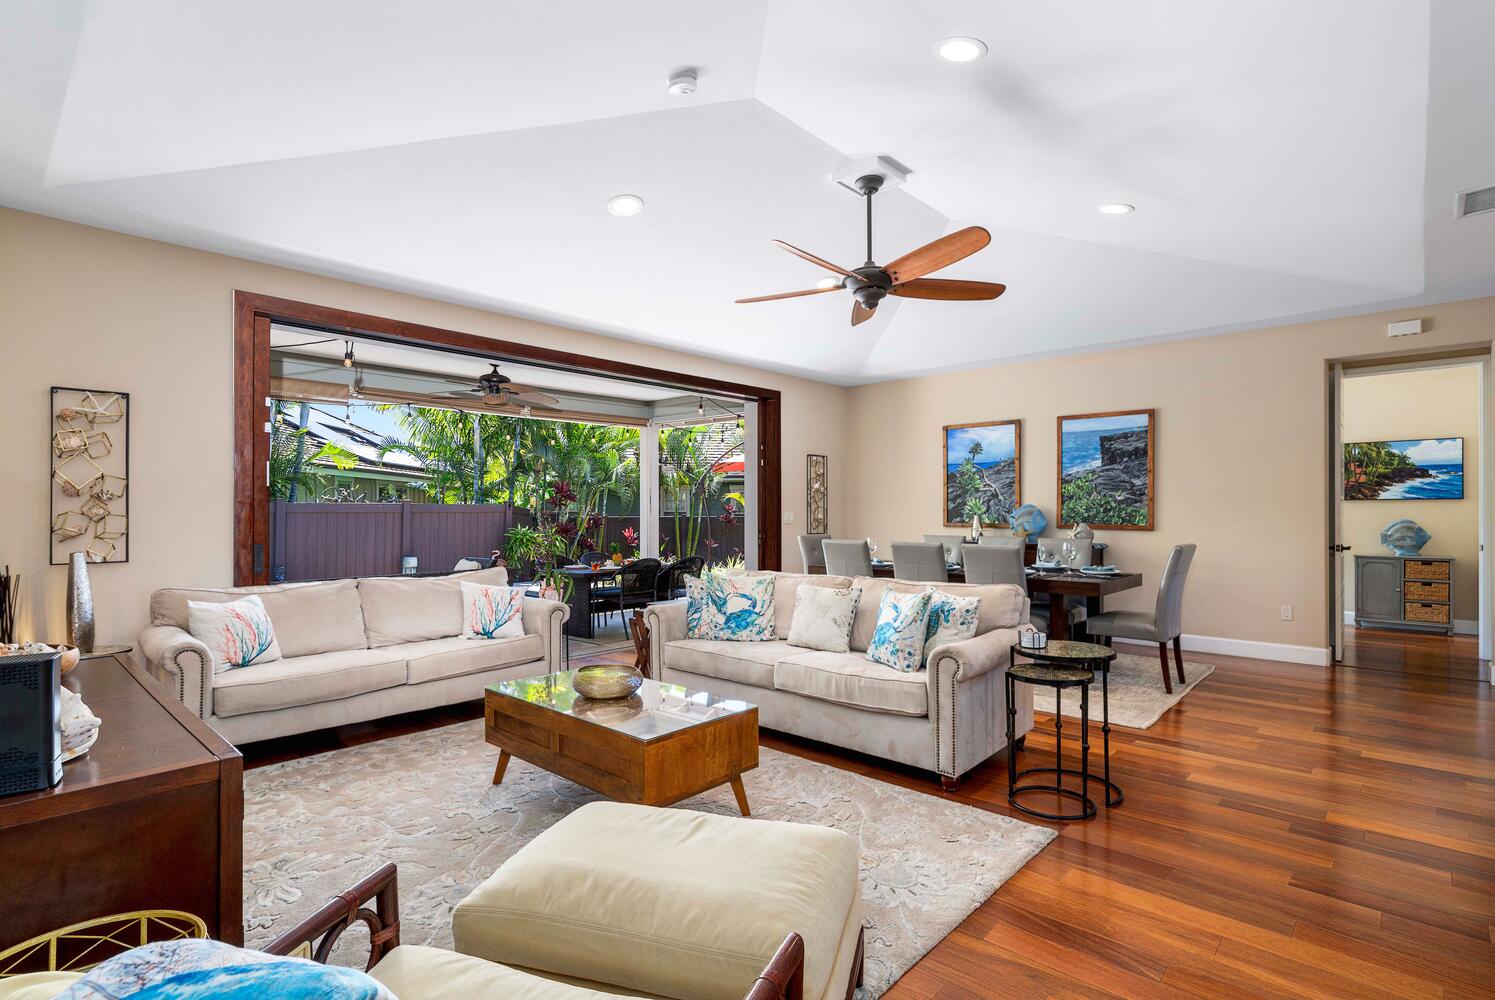 Kailua Kona Vacation Rentals, Holua Kai #32 - The bright and airy living area has high ceilings and central AC.